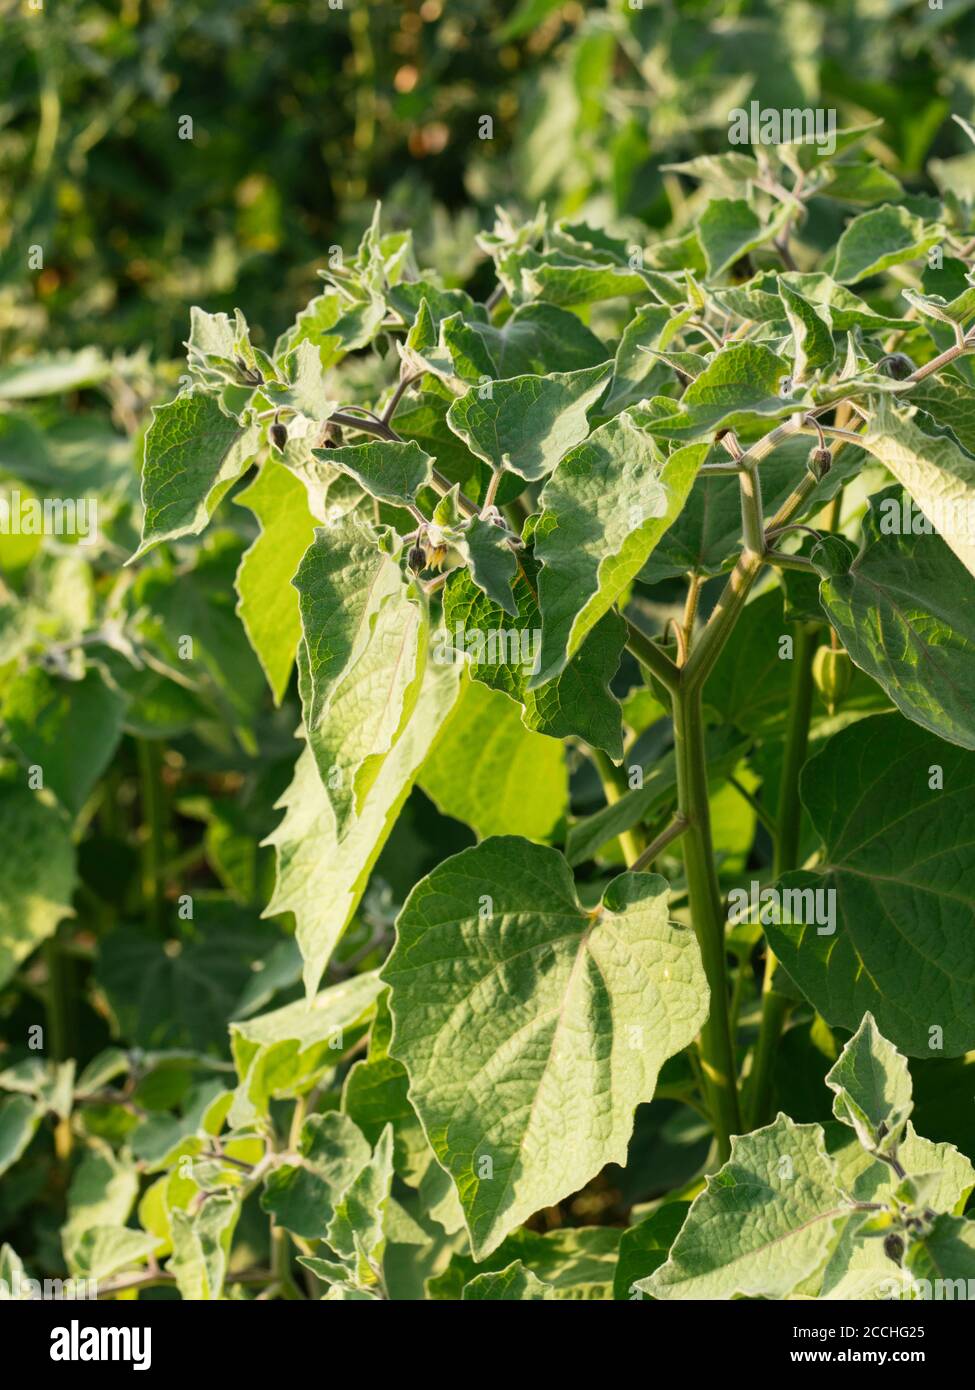 Physalis peruviana plants growing in a garden with flowers and green calyx Stock Photo